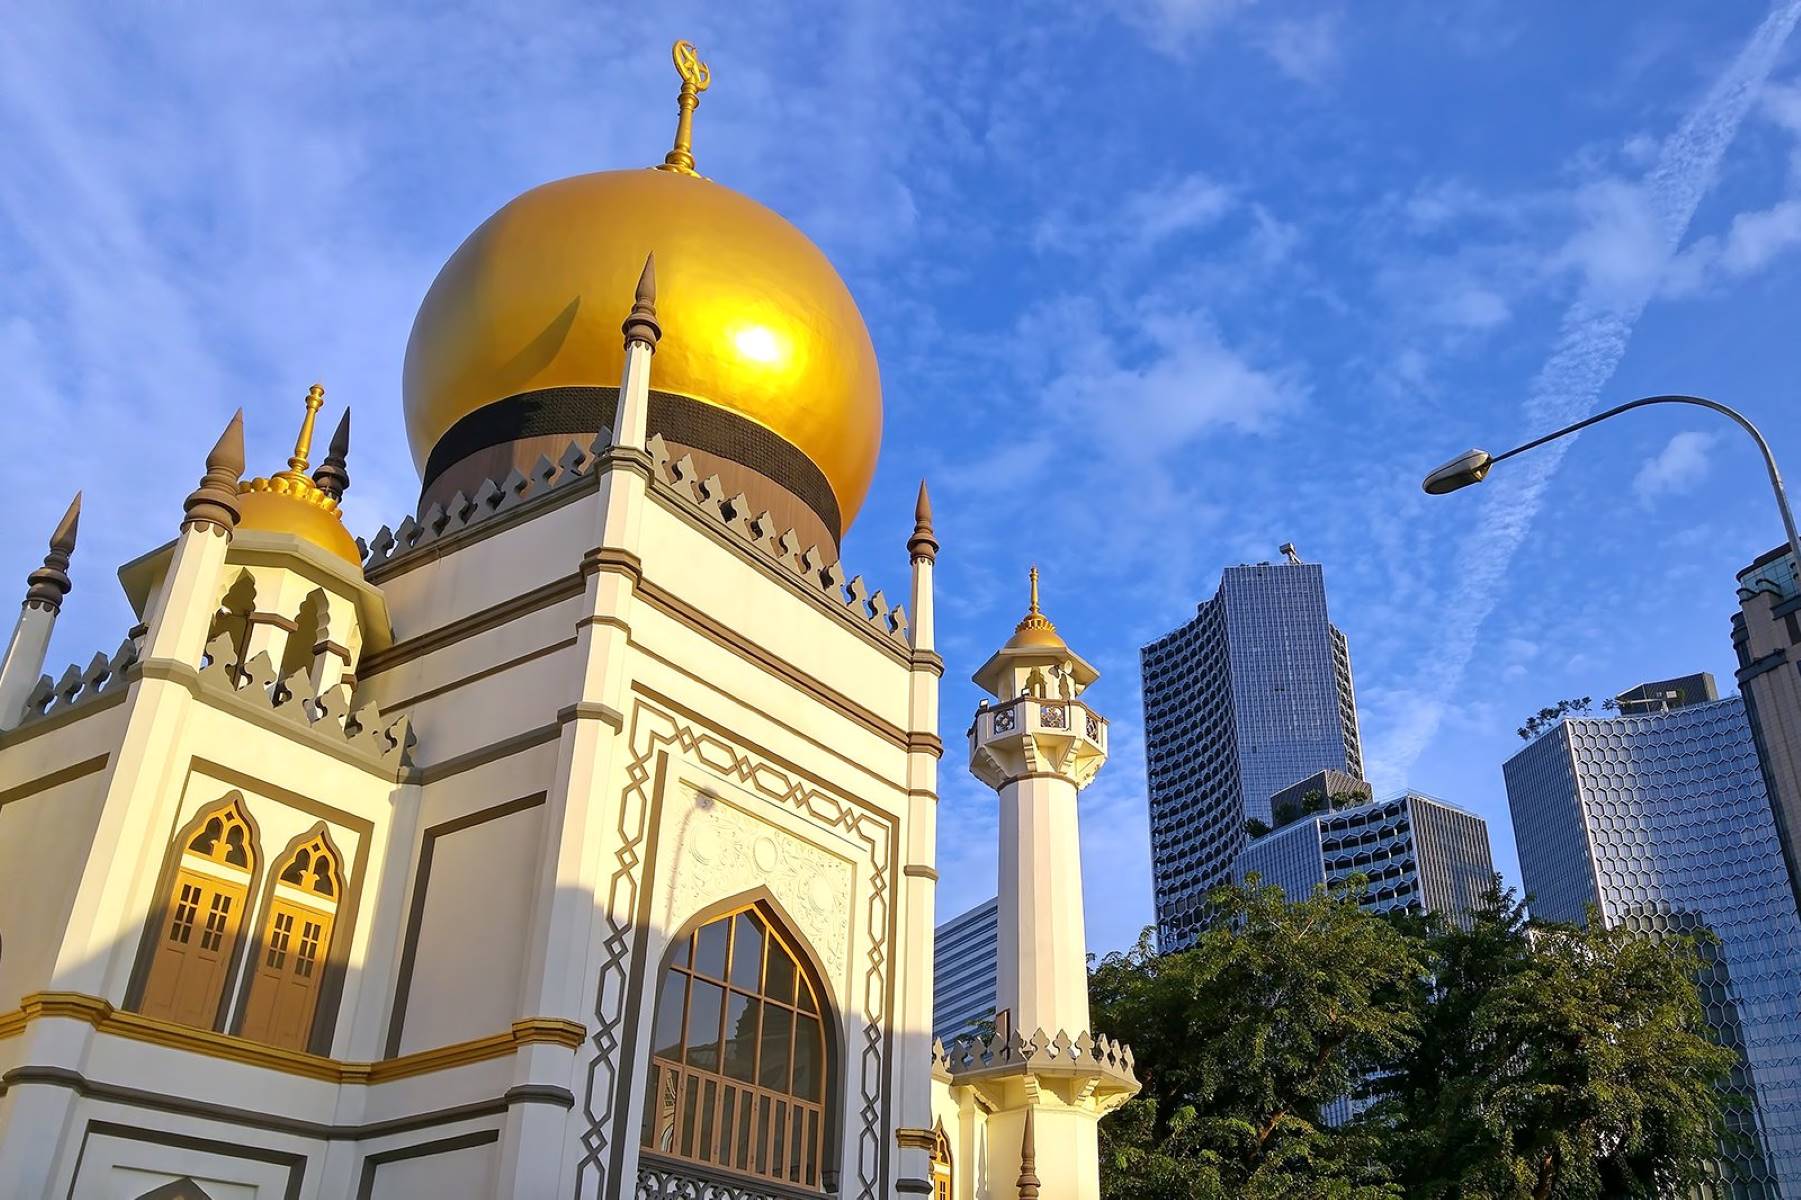 17-astounding-facts-about-sultan-mosque